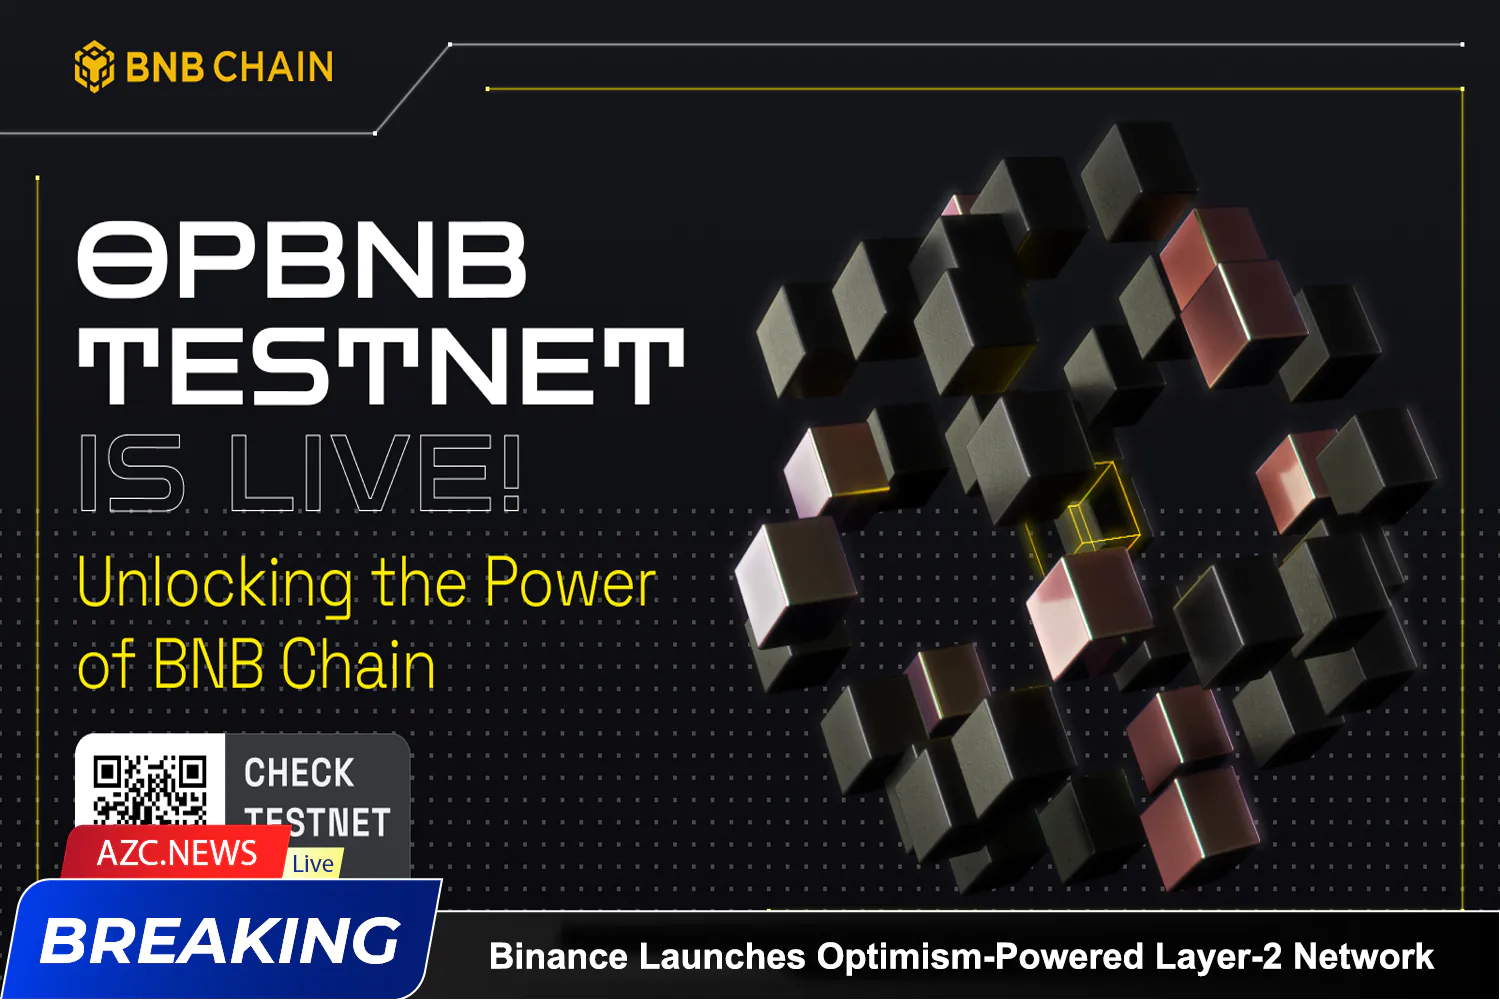 Azcnews Binance Launches Optimism Powered Layer 2 Network